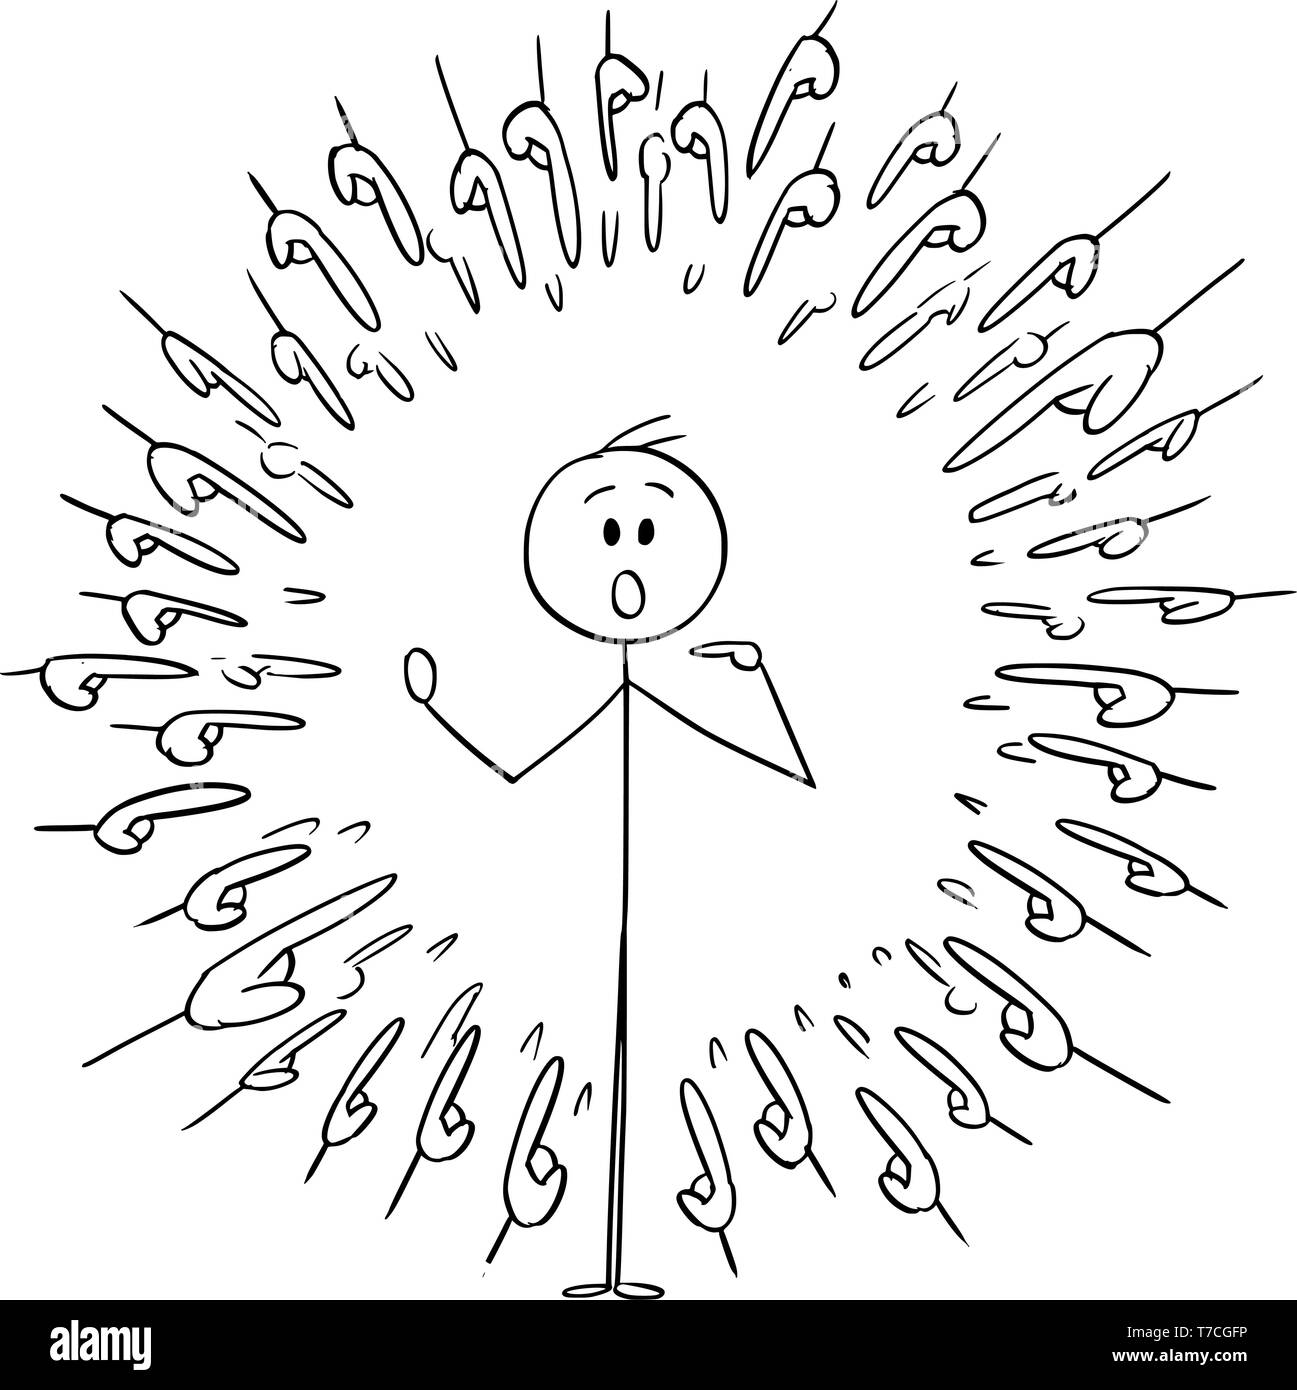 Cartoon stick figure drawing conceptual illustration of shocked man and many hands and fingers pointing at him as metaphor of selection or blame. Stock Vector